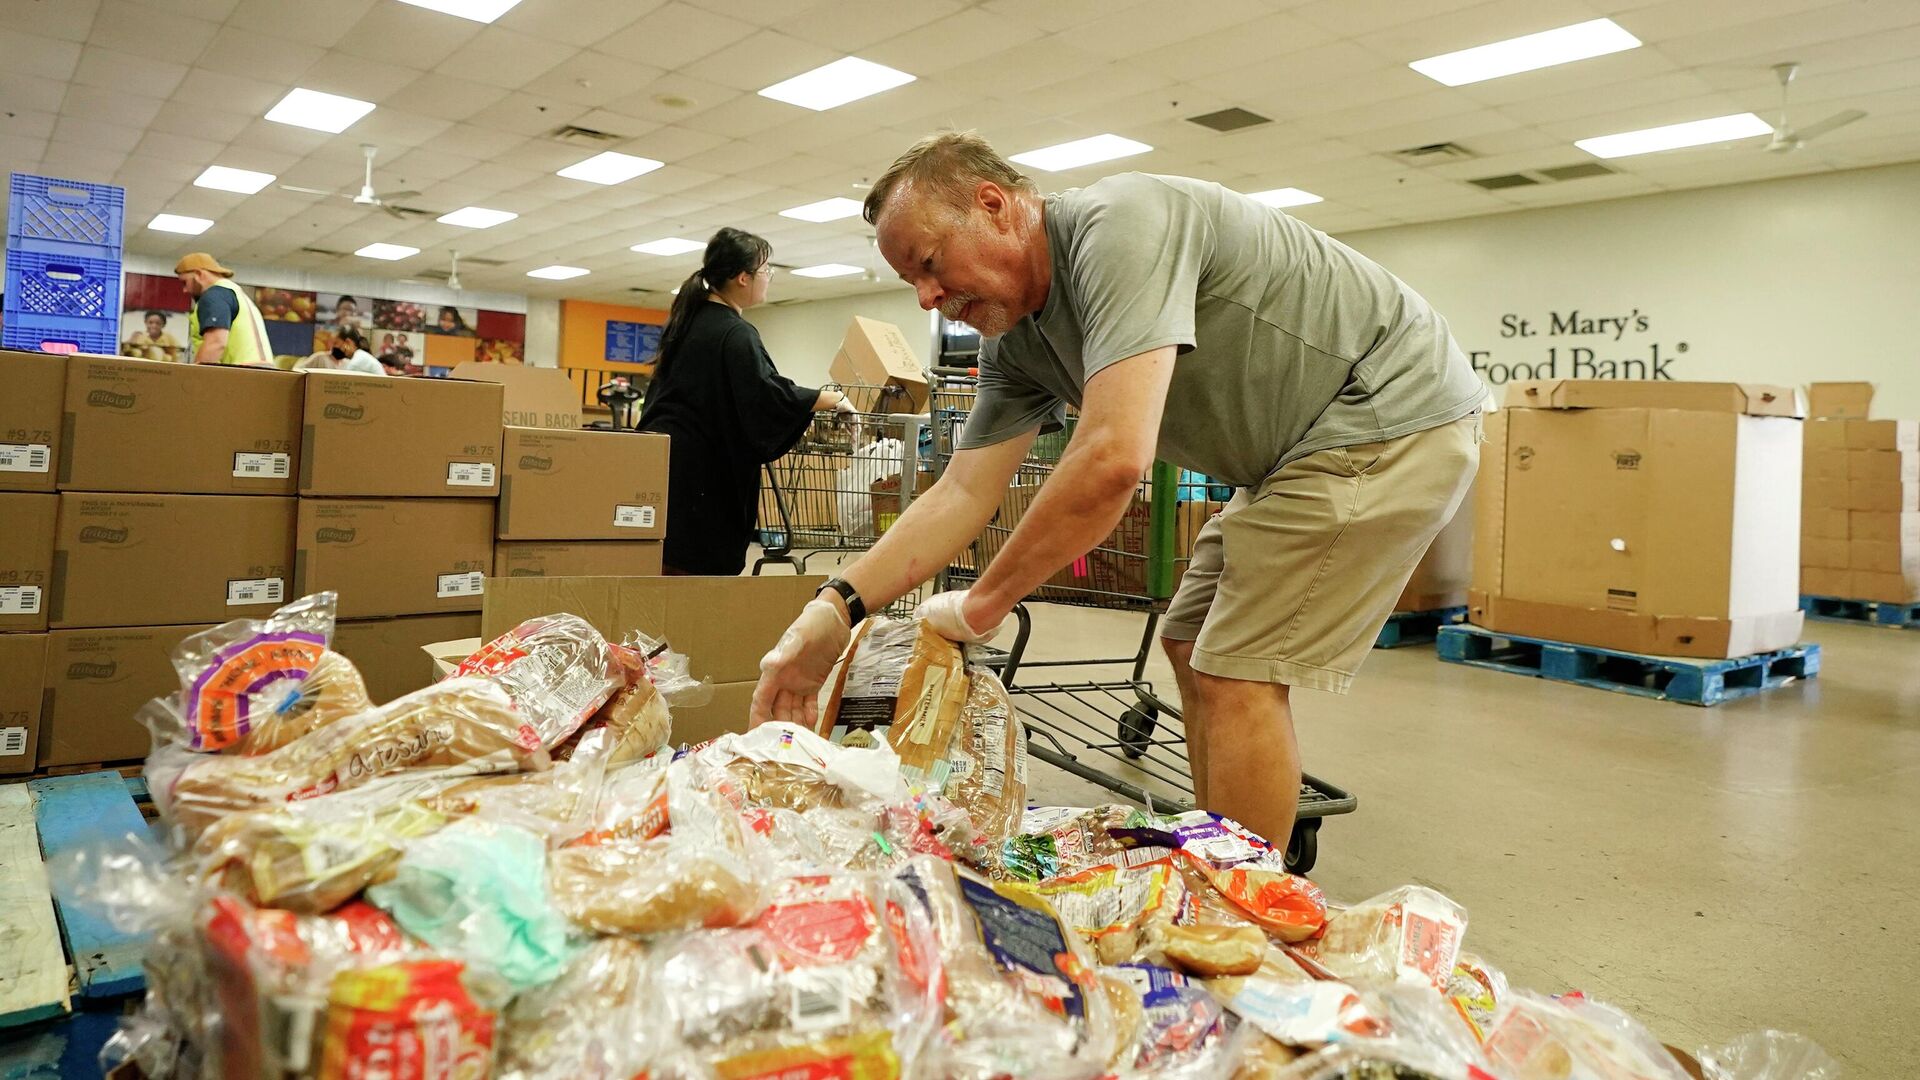 Volunteers fill up grocery carts with food for distribution into drive through vehicles at the St. Mary's Food Bank Wednesday, June 29, 2022, in Phoenix - Sputnik International, 1920, 26.07.2022